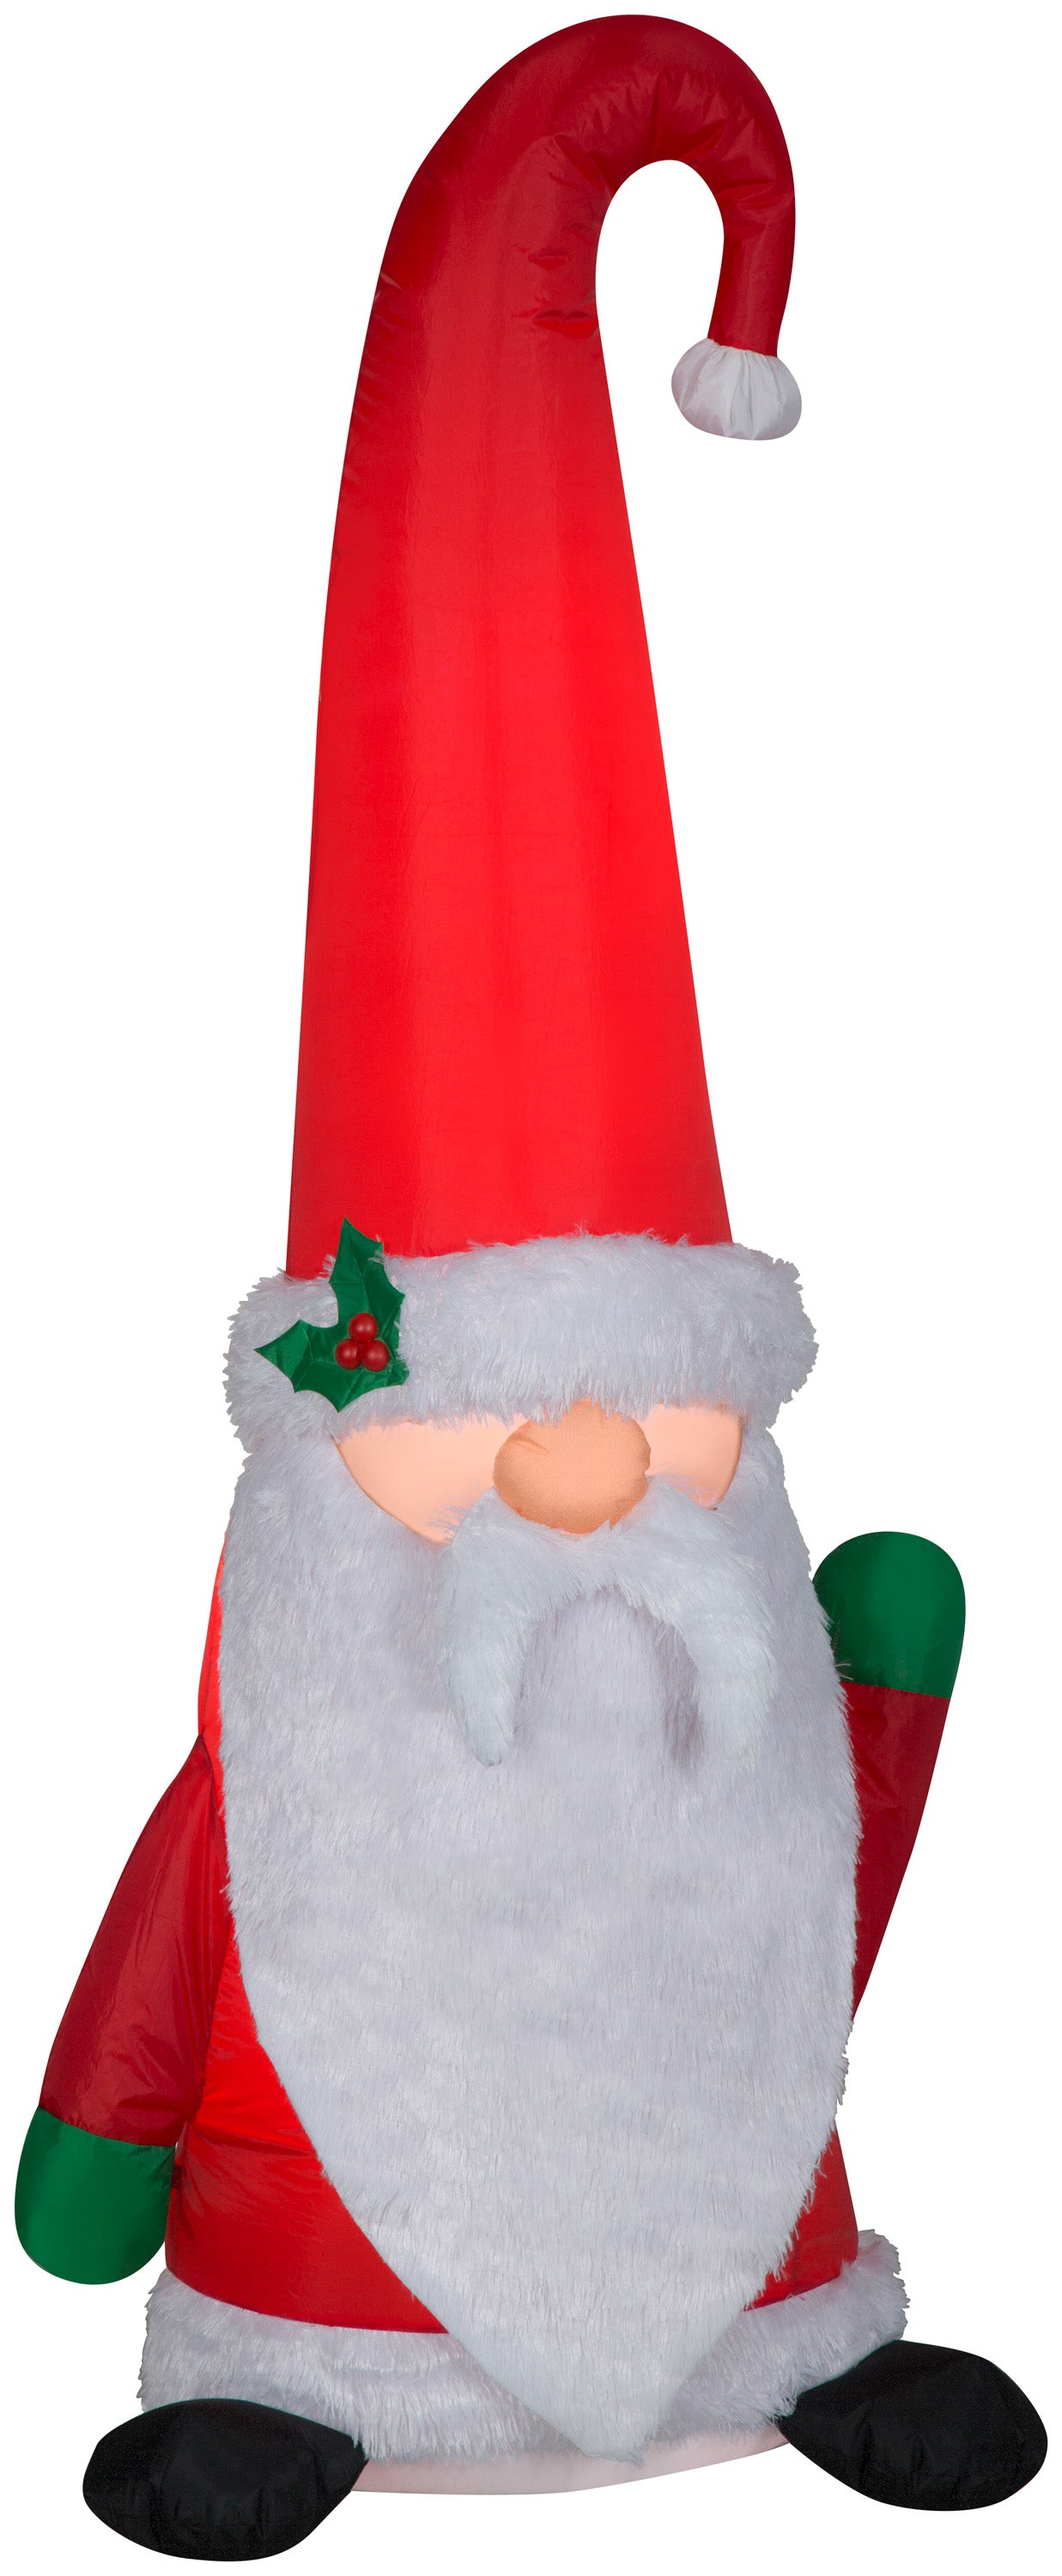 Gemmy Christmas Airblown Inflatable Mixed Media Gnome w/Curved Hat, 5 ft Tall, Multicolored